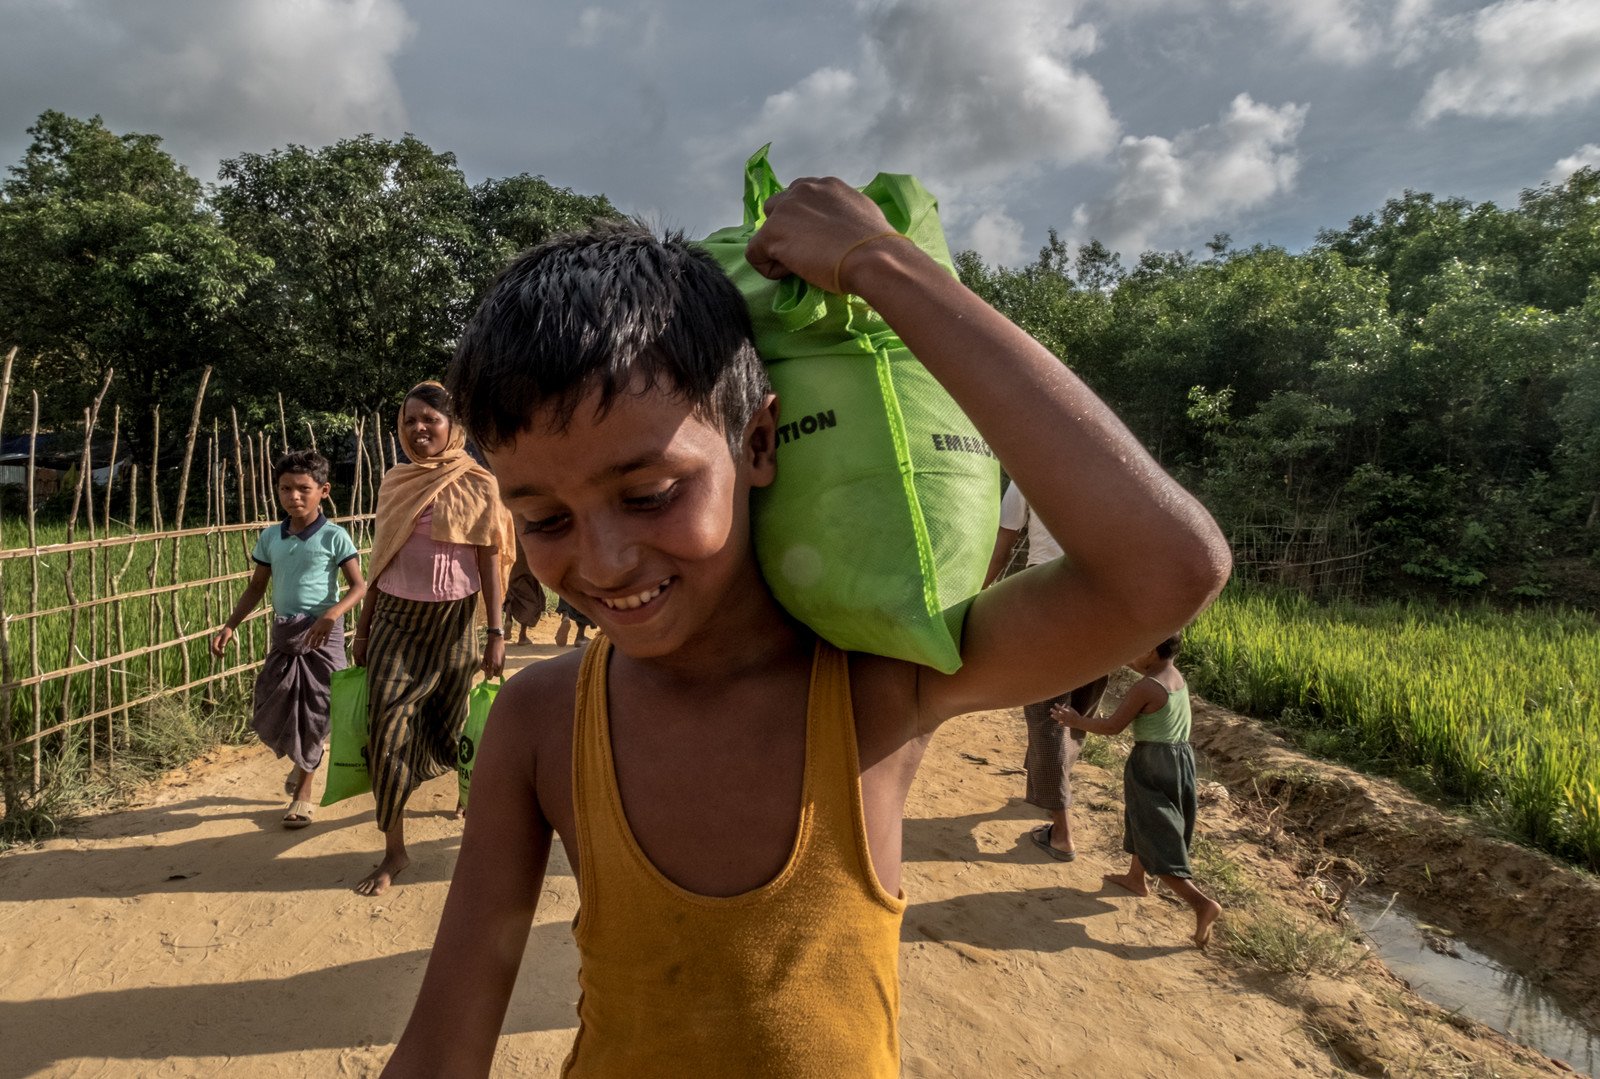 Oxfam distributed food parcels, which included three kilograms of flattened rice and one kilogram of sugar. This can last us two days. Today we will cook potatoes with rice for dinner,’ said Mohammad. (Photo: Tommy Trenchard/Oxfam)